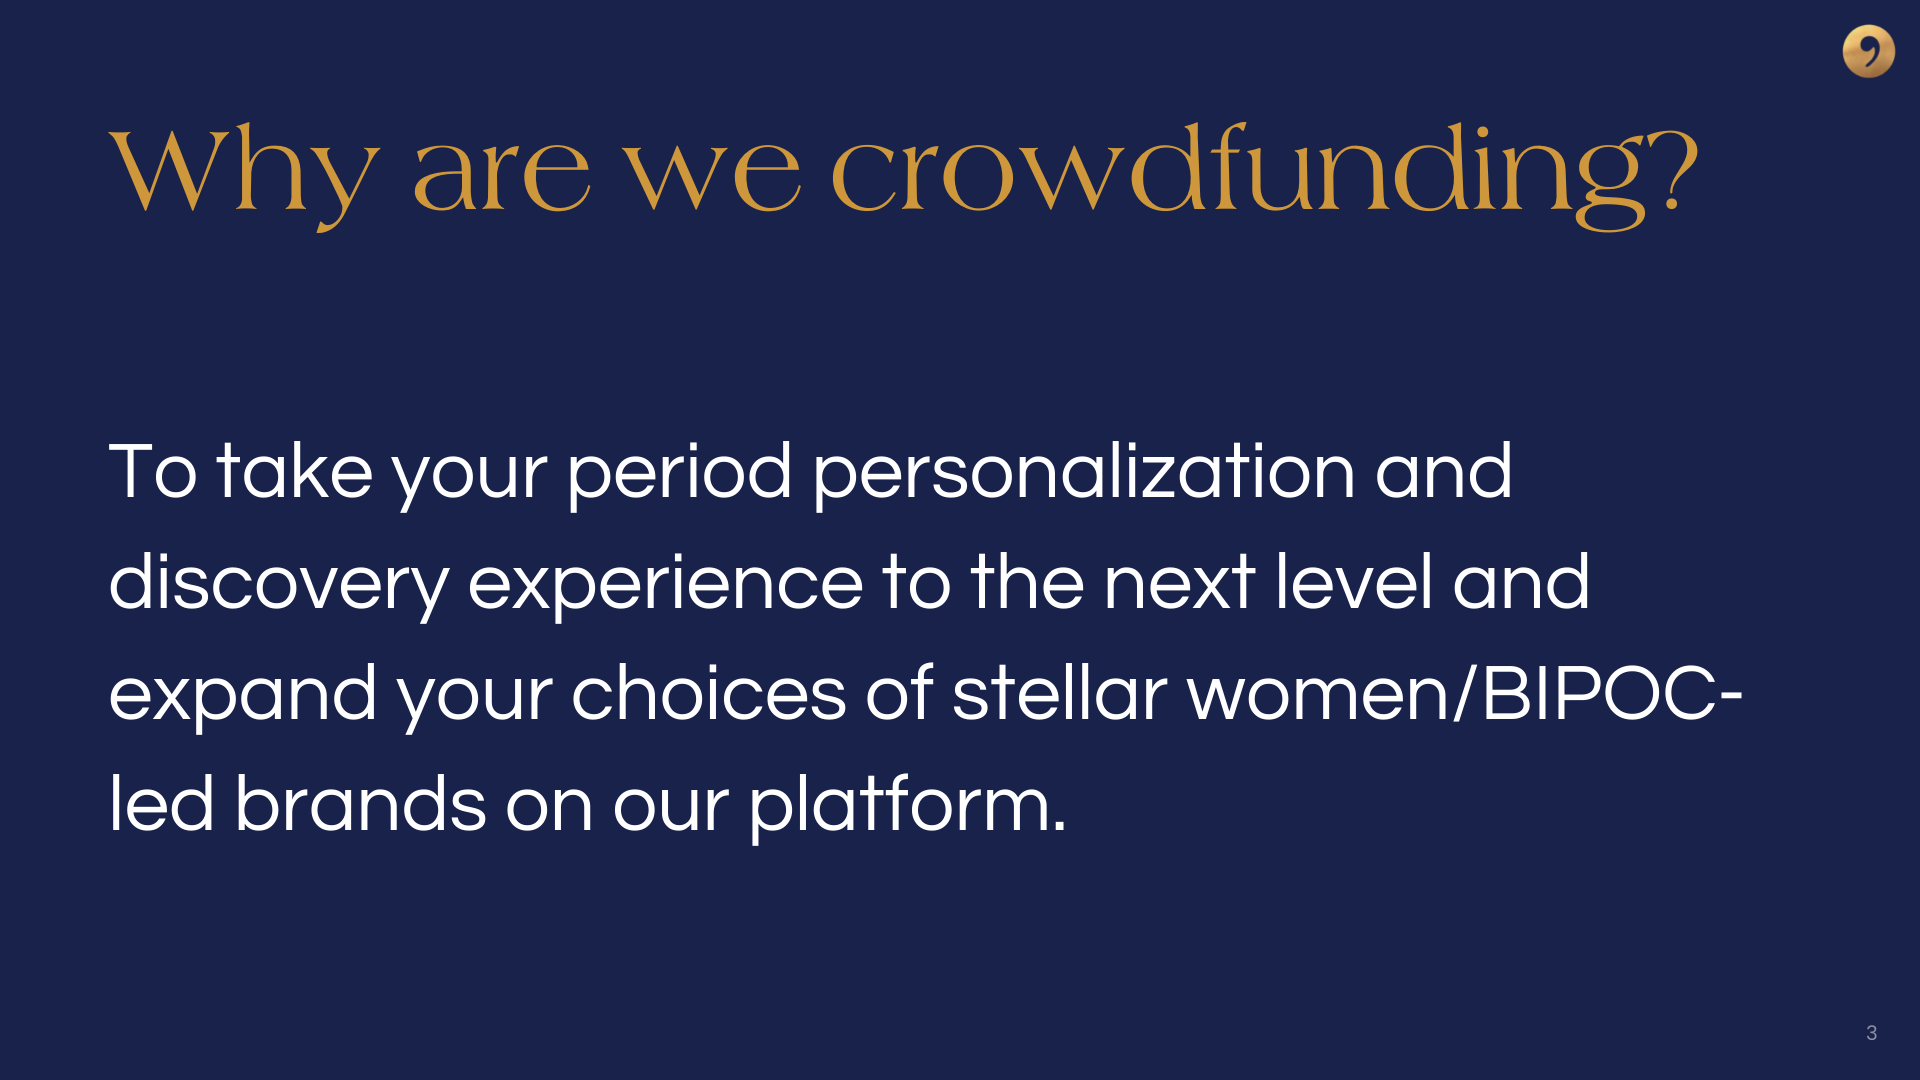 We are crowdfunding becauase we want to take your period personalization and discovery experience to the next level and expand your choices of stellar women/BIPOC-led brands on our platform.